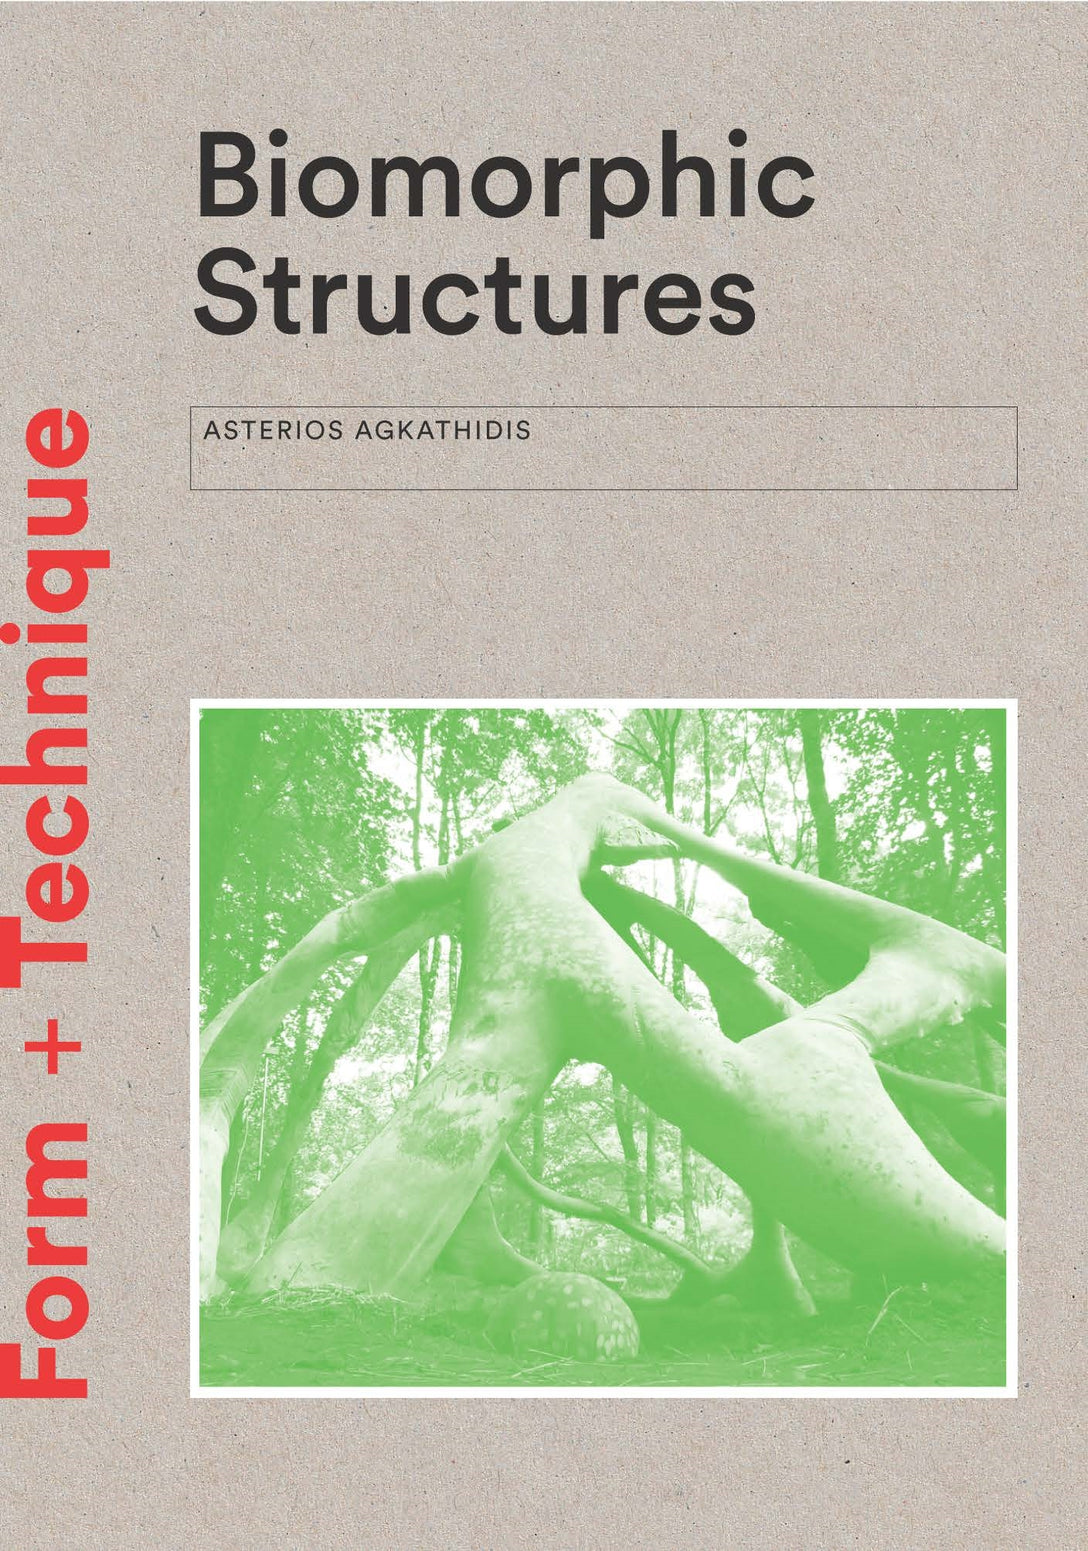 Biomorphic Structures by Asterios Agkathidis